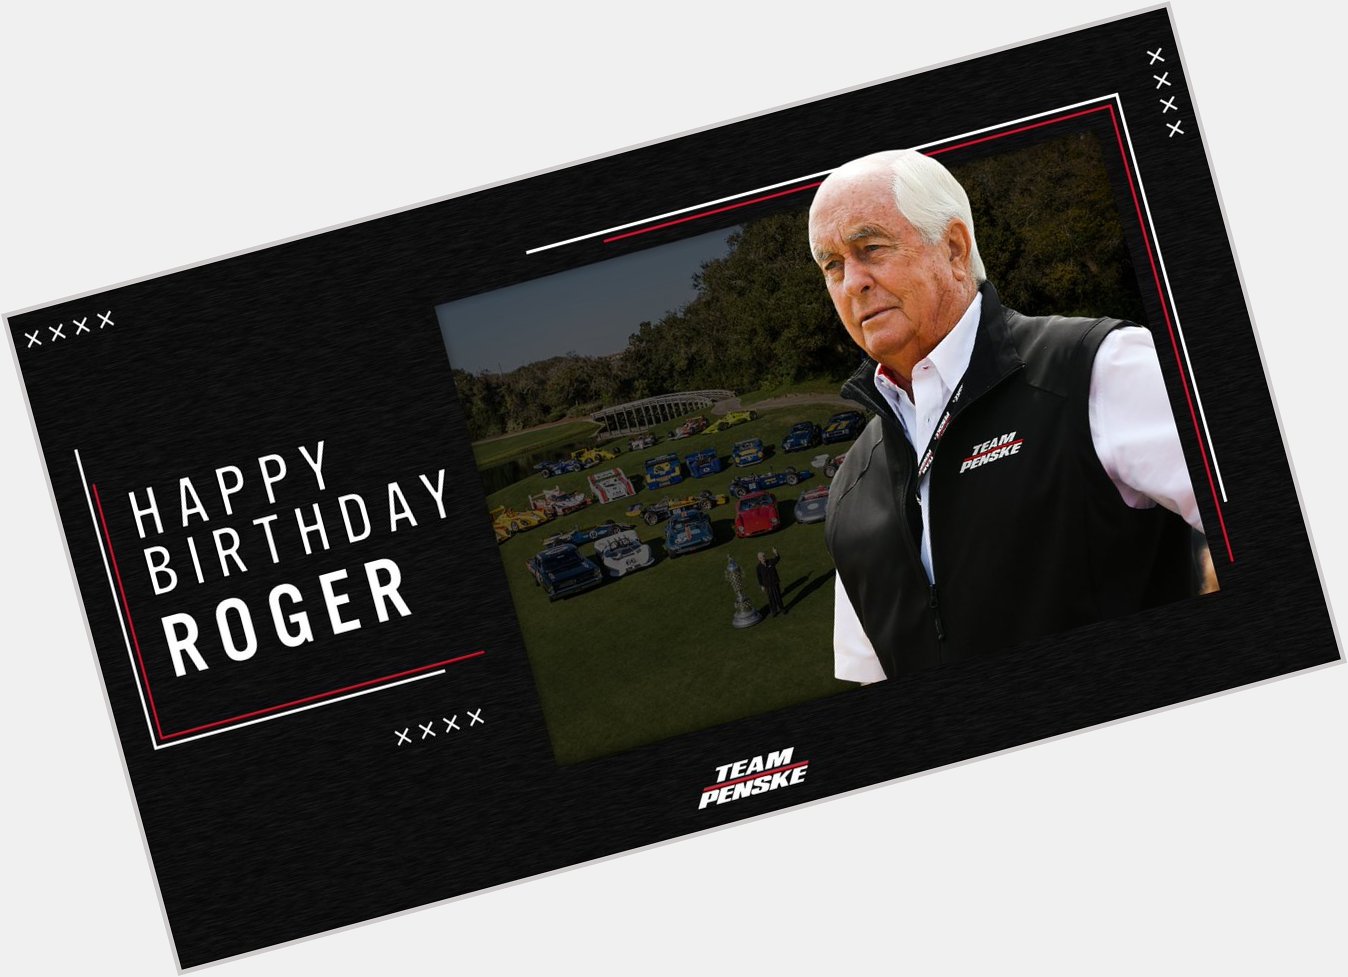  Please join us in wishing The Captain Roger Penske a happy birthday! 